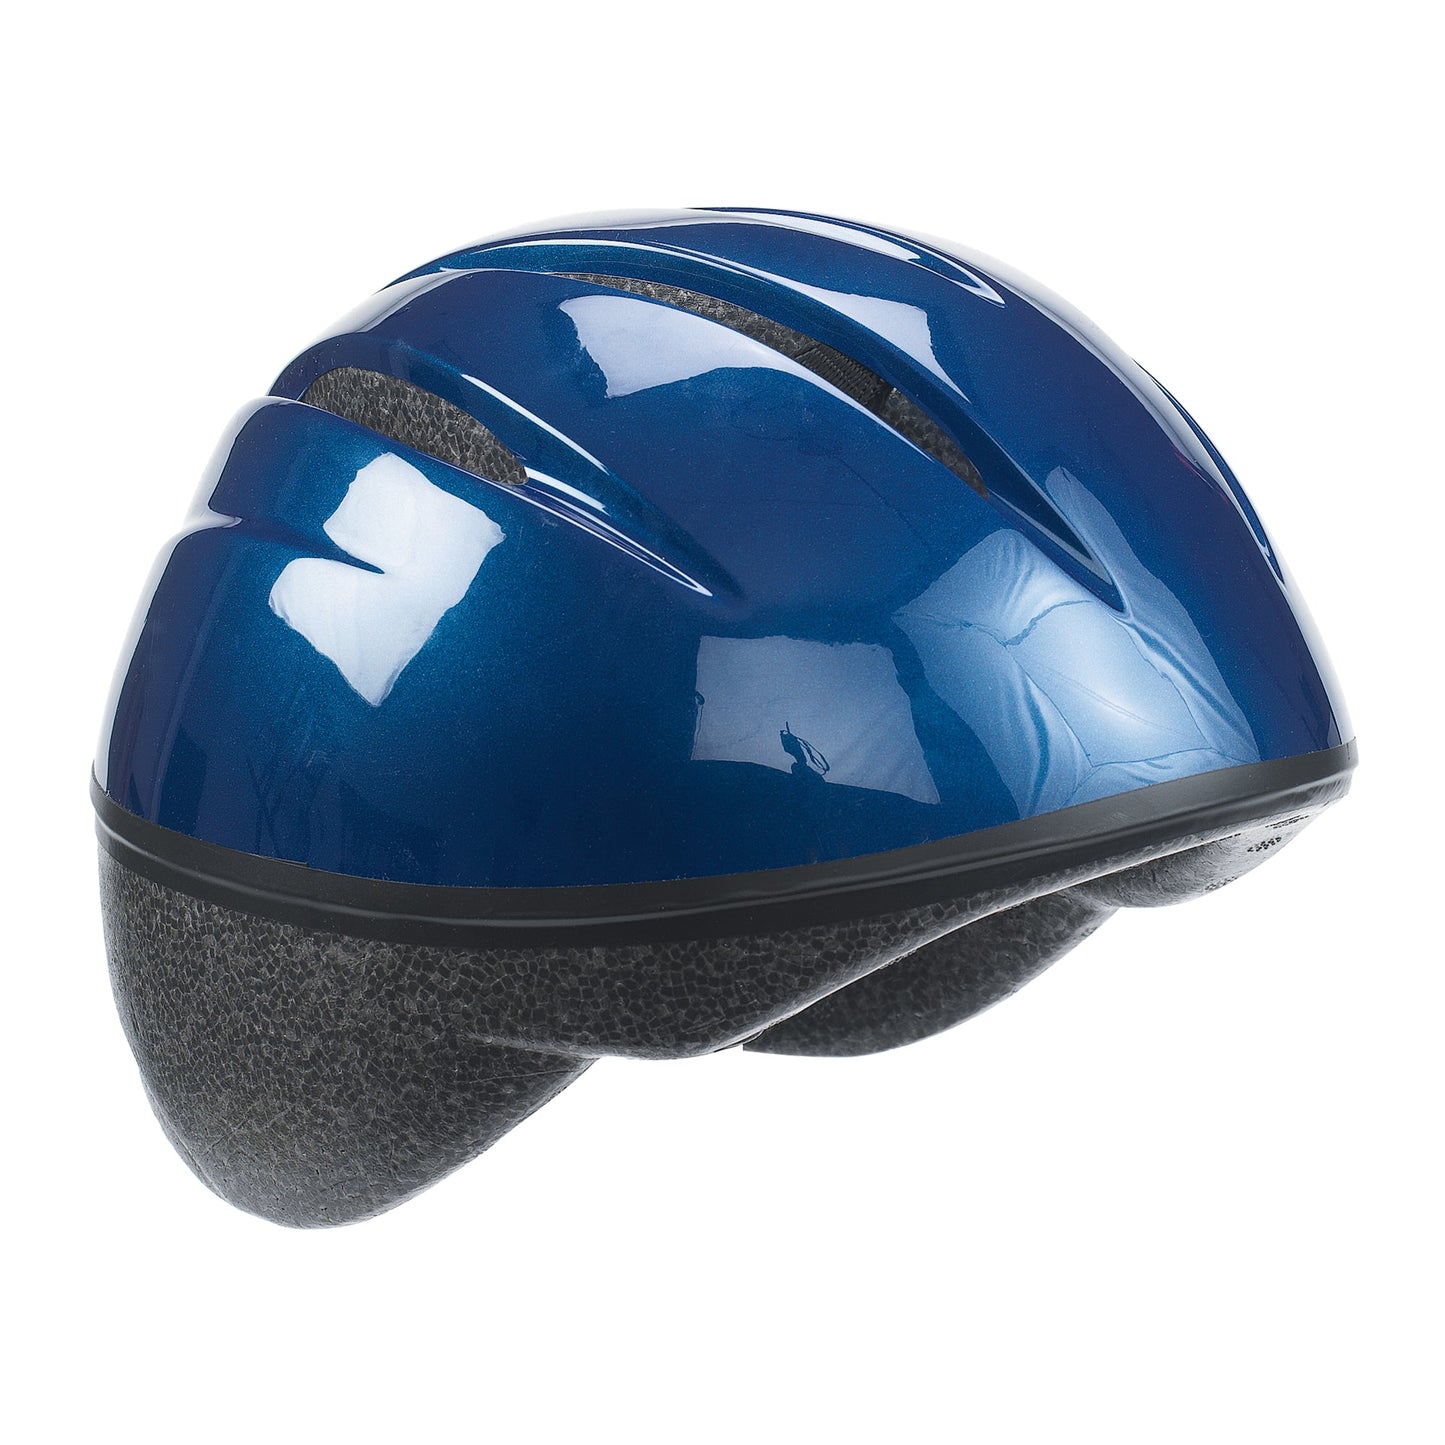 Angeles Toddler-Size Helmet Fits Head Size from 18" - 20" (AFB4200B) - SchoolOutlet